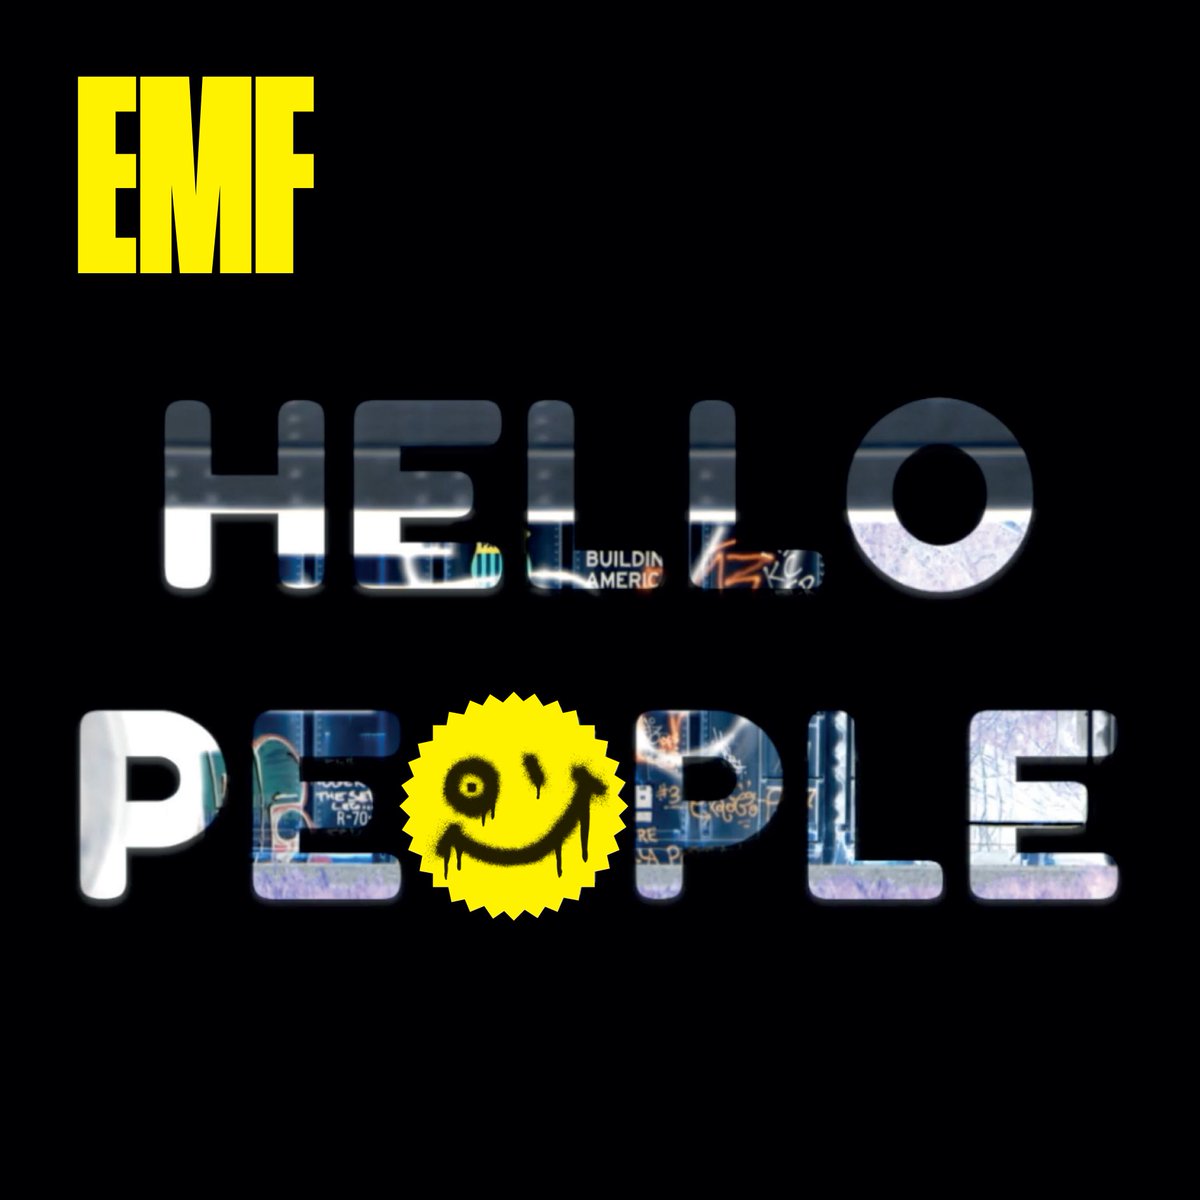 News – EMF – Hello People (featuring Stephen Fry)